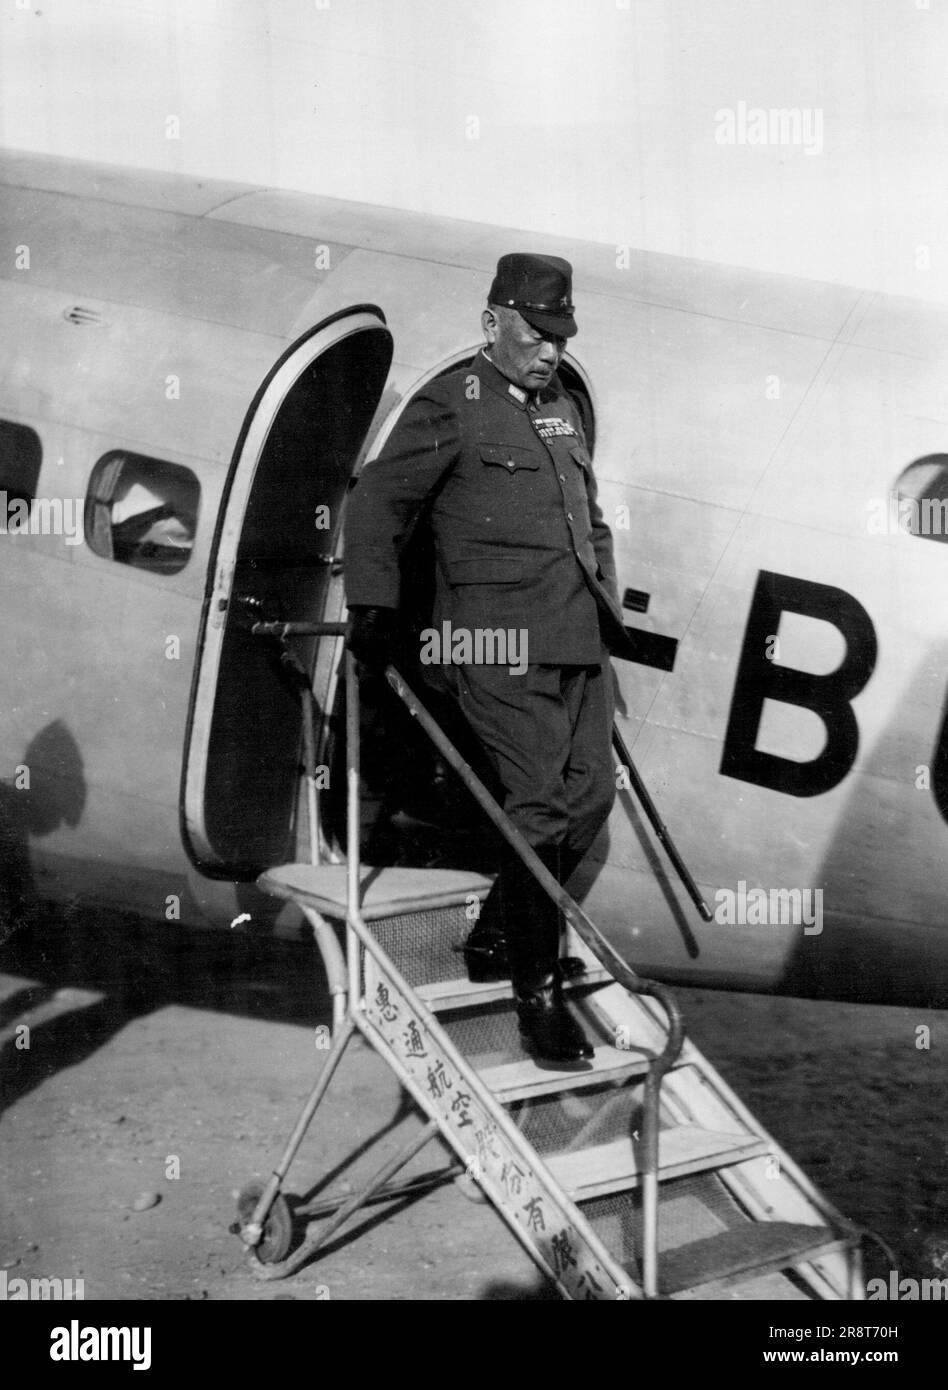 Reunion in China, Sugiyama New North China Commander ... General Gen Sugiyama, who was appoint Supreme commander of the Japanese forces in North Terauchi, is seen as landing from a plane at an undisclosed place in North China. December 09, 1938. (Photo by The Domei News Photos Service). Stock Photo